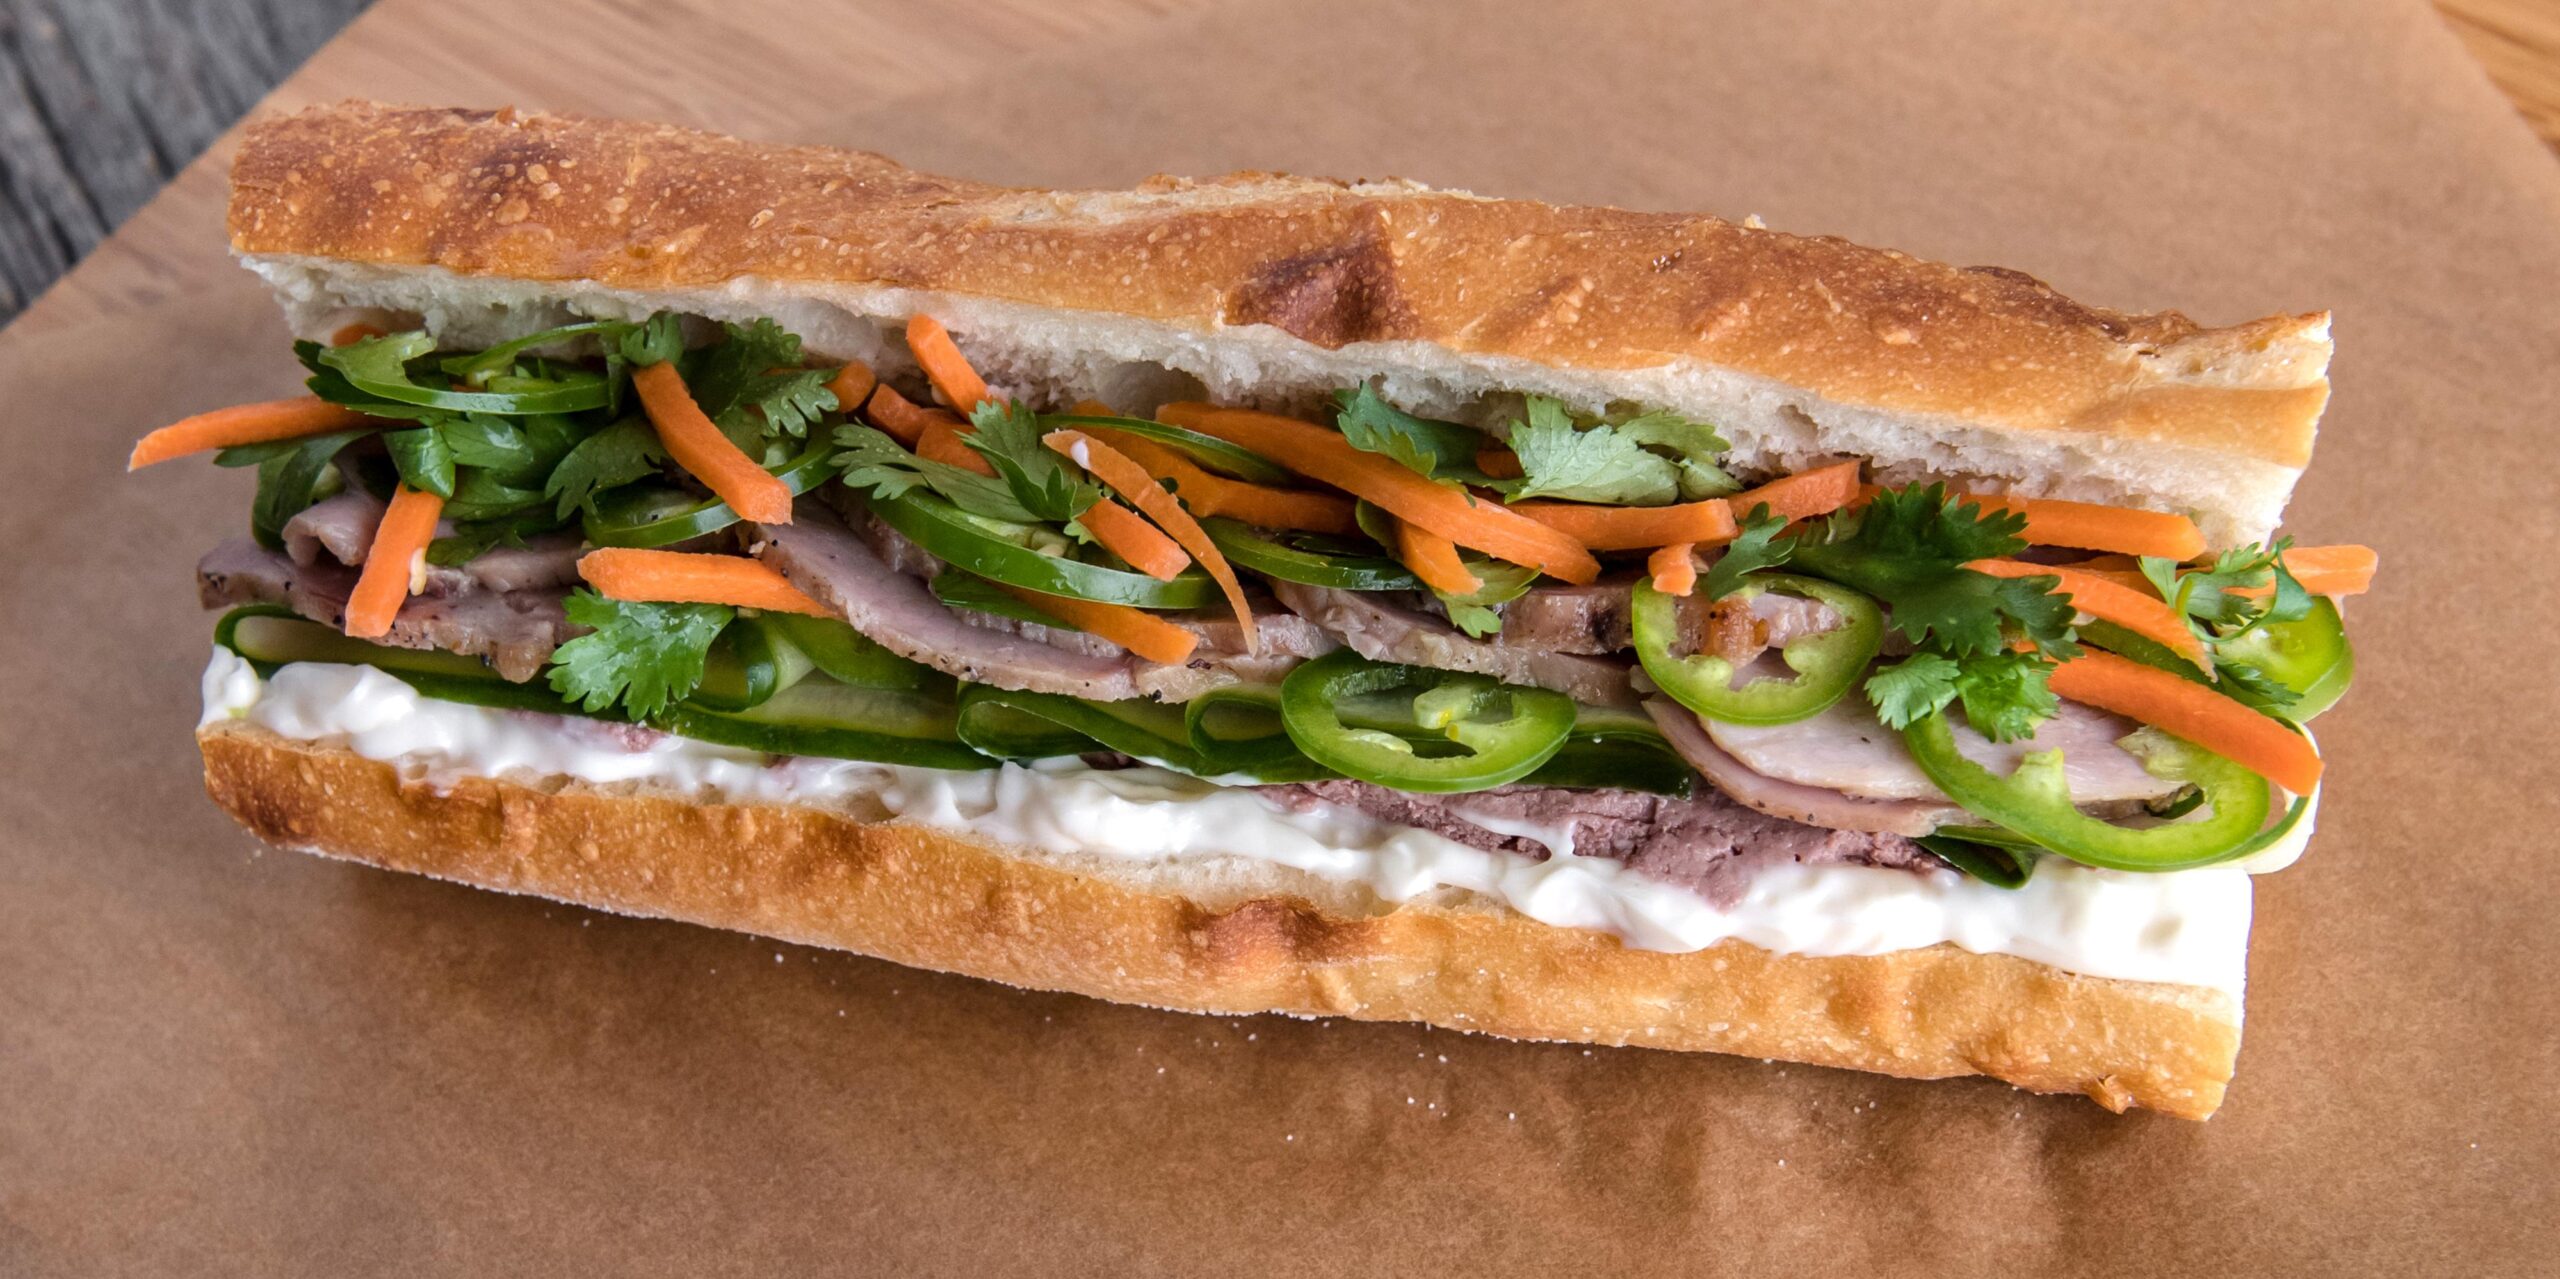  Savor the crispy crust and soft interior of this Vietnamese baguette.